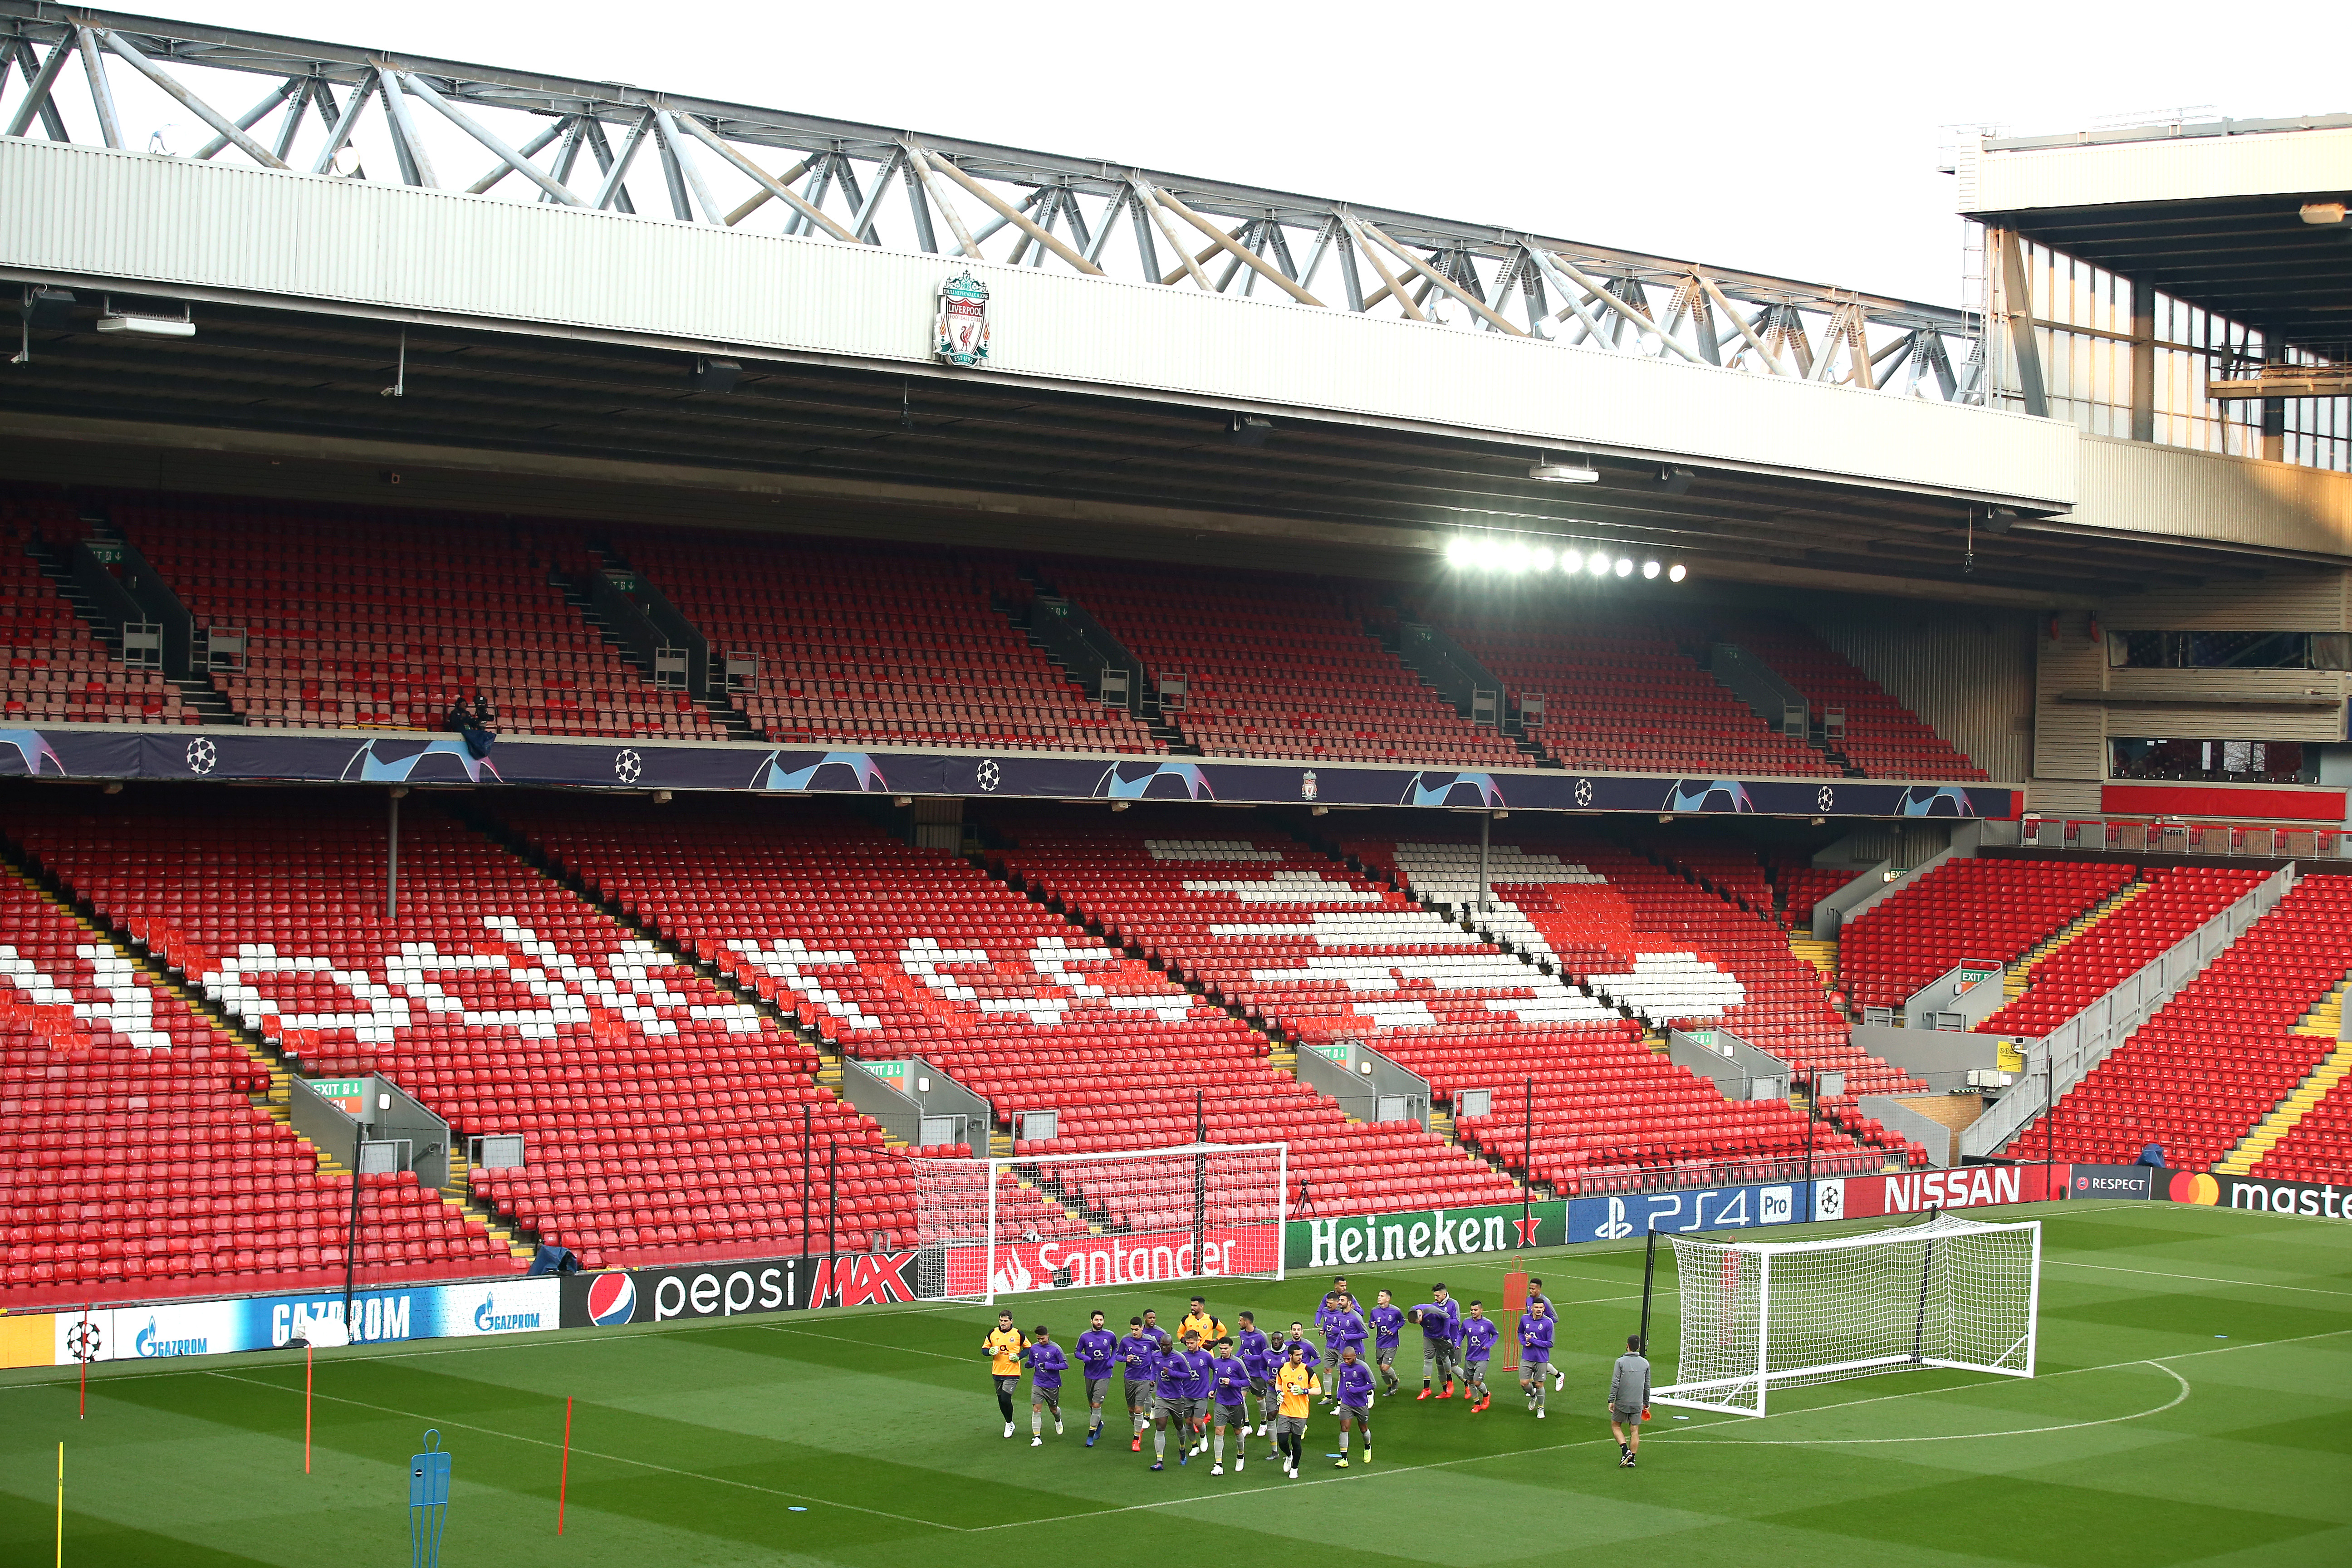 LIVERPOOL, ENGLAND - APRIL 08: The FC Porto team train during the FC Porto Training Session ahead of there UEFA Champions League Quarter Final First Leg against Liverpool FC tomorrow at Anfield on April 08, 2019 in Liverpool, England. (Photo by Jan Kruger/Getty Images)